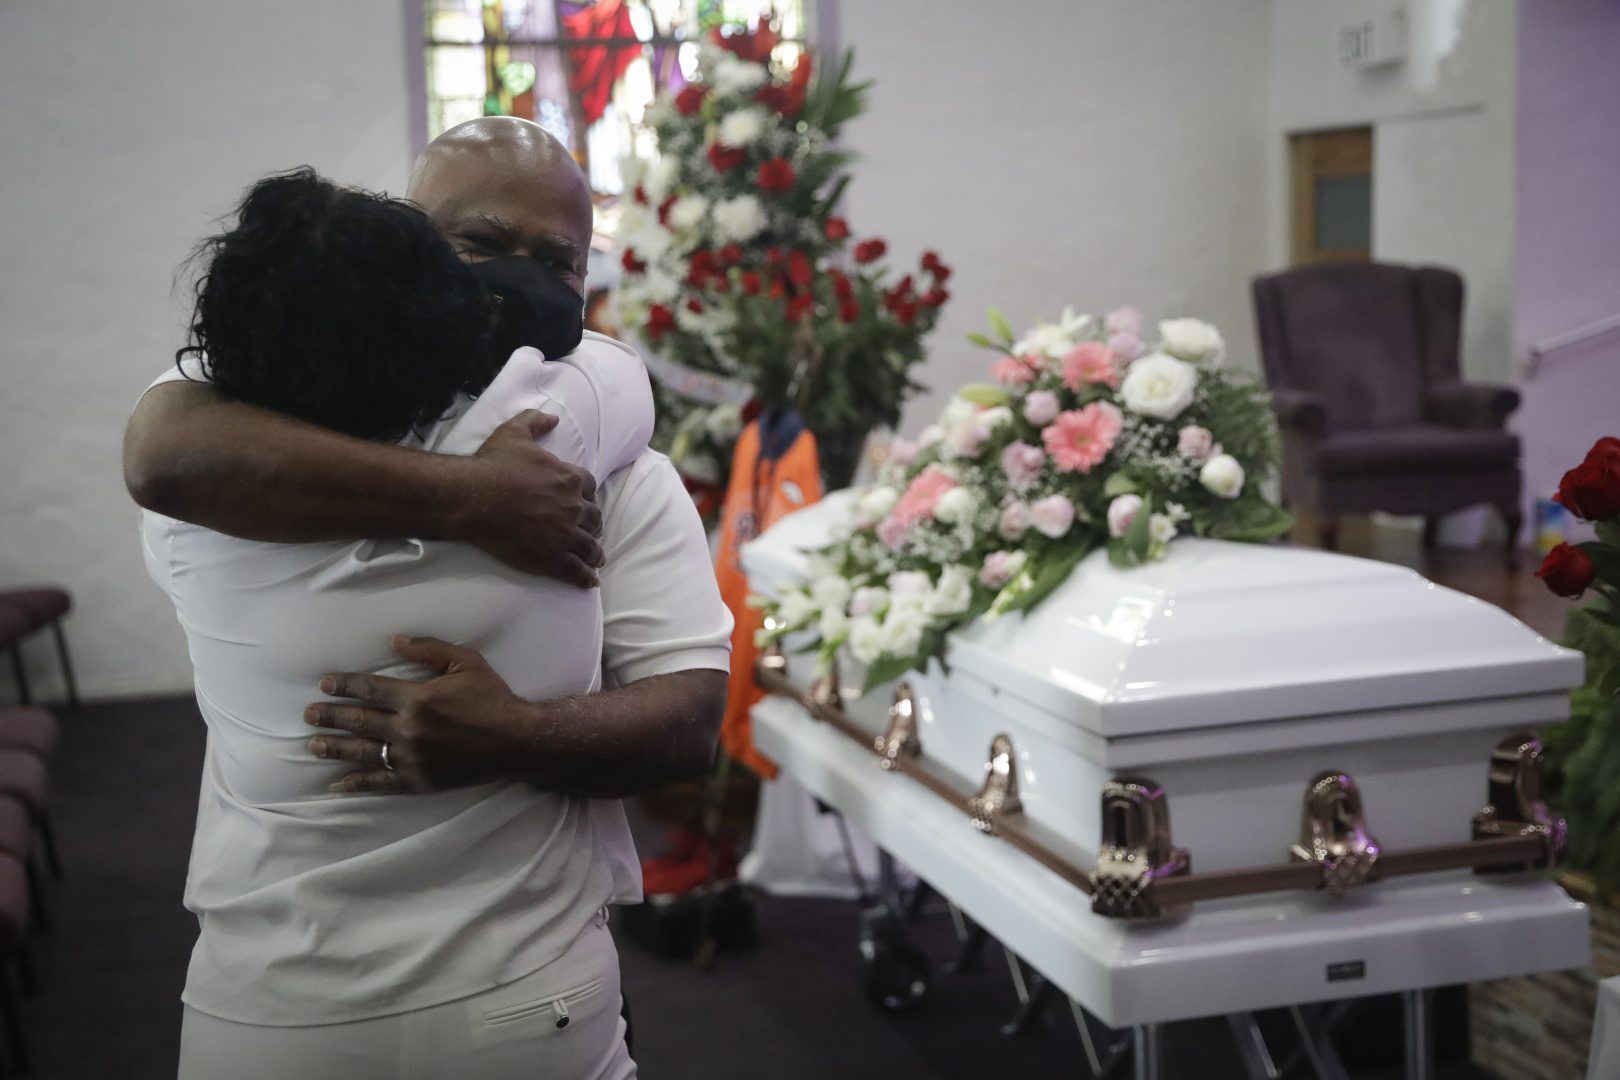 FILE - Darryl Hutchinson, facing camera, is hugged by a fellow relative during a funeral service for Lydia Nunez, who was Hutchinson's cousin, Tuesday, July 21, 2020, at the Metropolitan Baptist Church in Los Angeles. Nunez died from COVID-19.